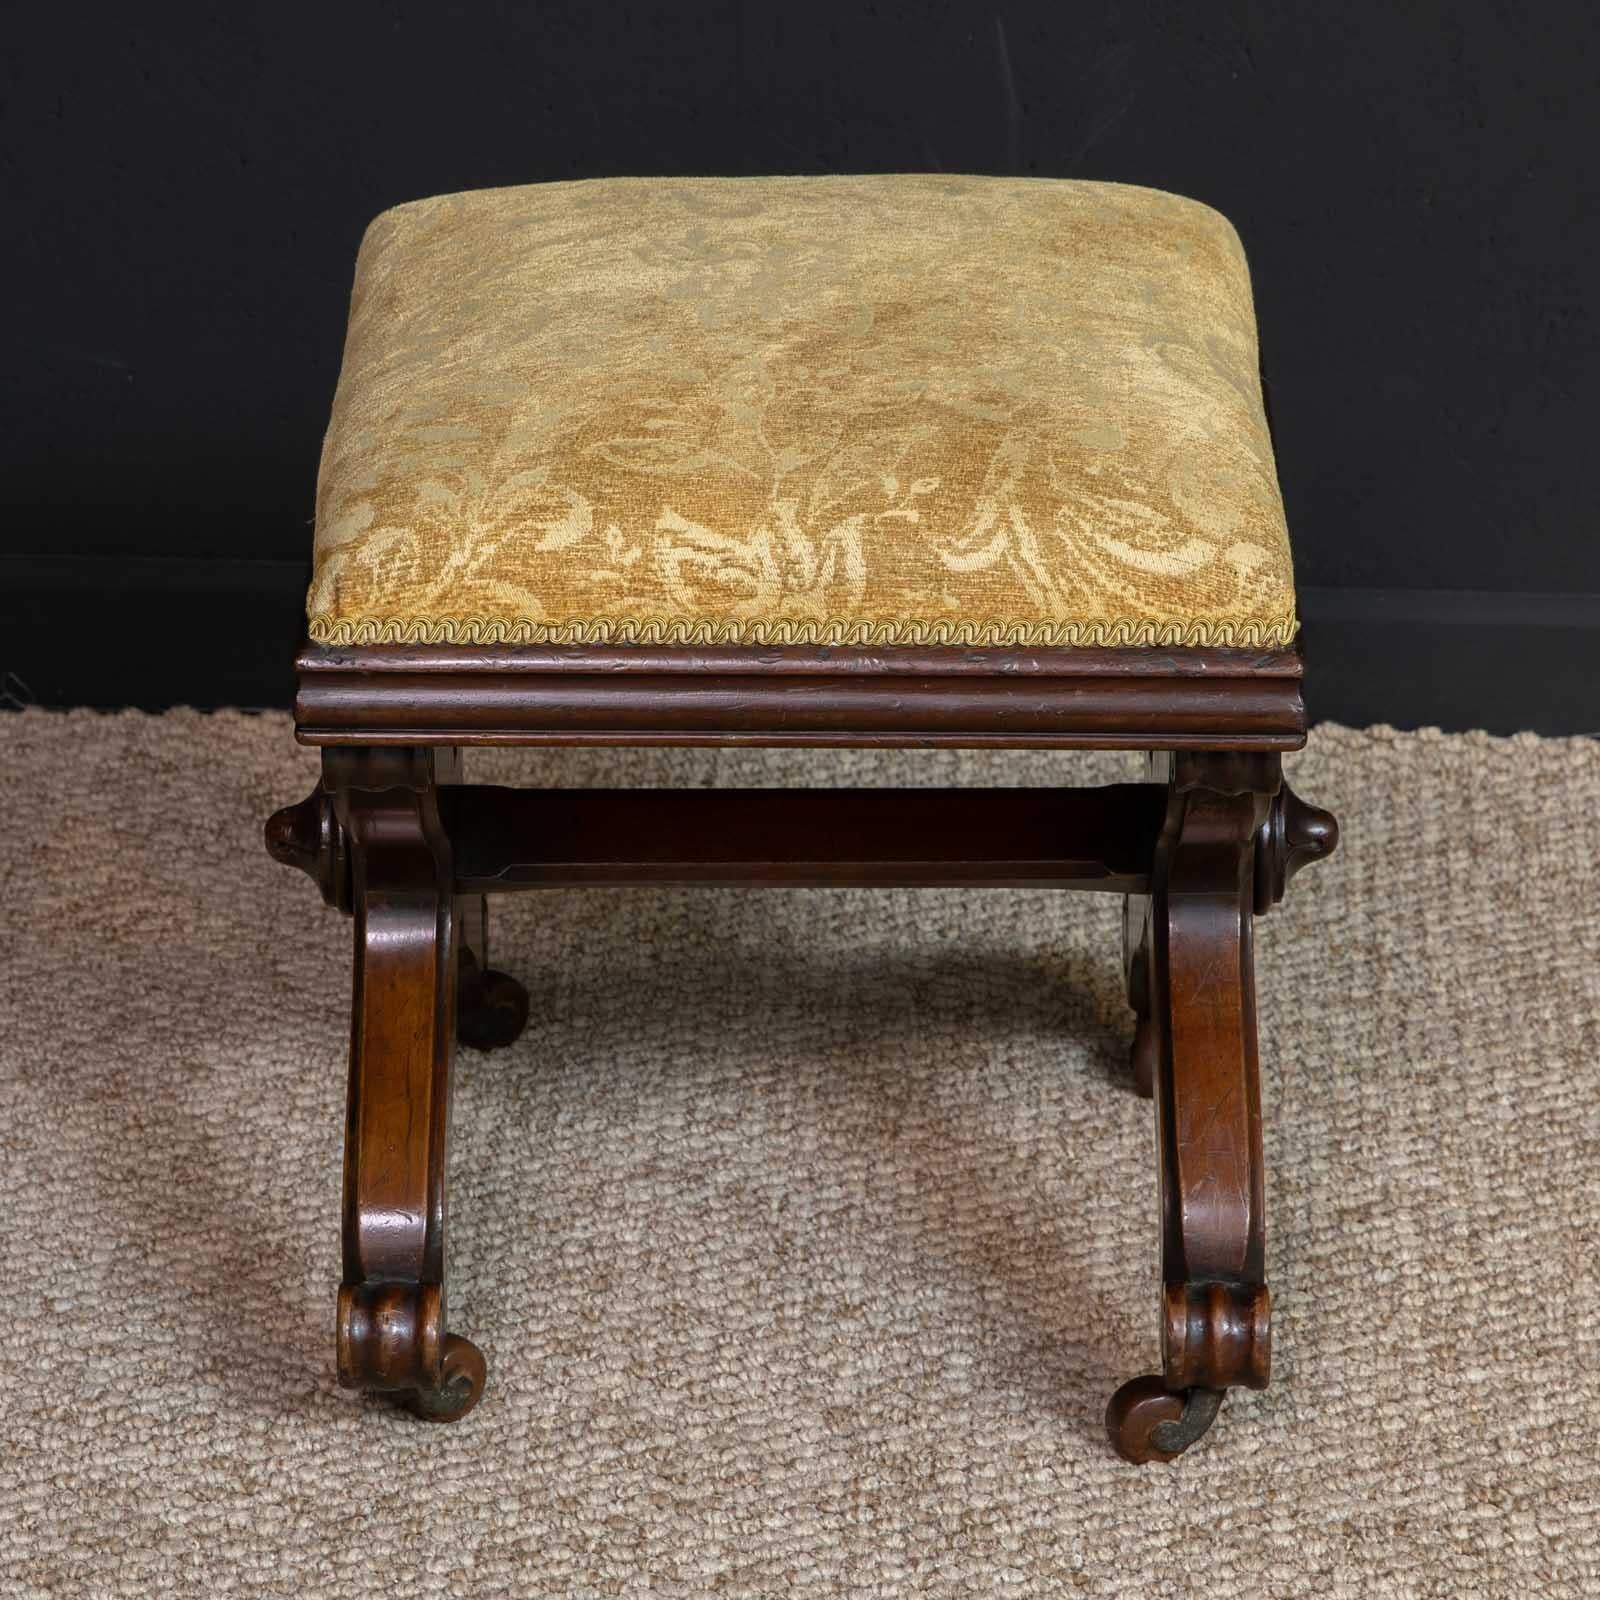 A William IV mahogany X-framed stool of small proportions. One or two interesting features like the scroll feet and central carved bosses make it a cut above average. Very solid and sturdy with the gold patterned draylon being in very good